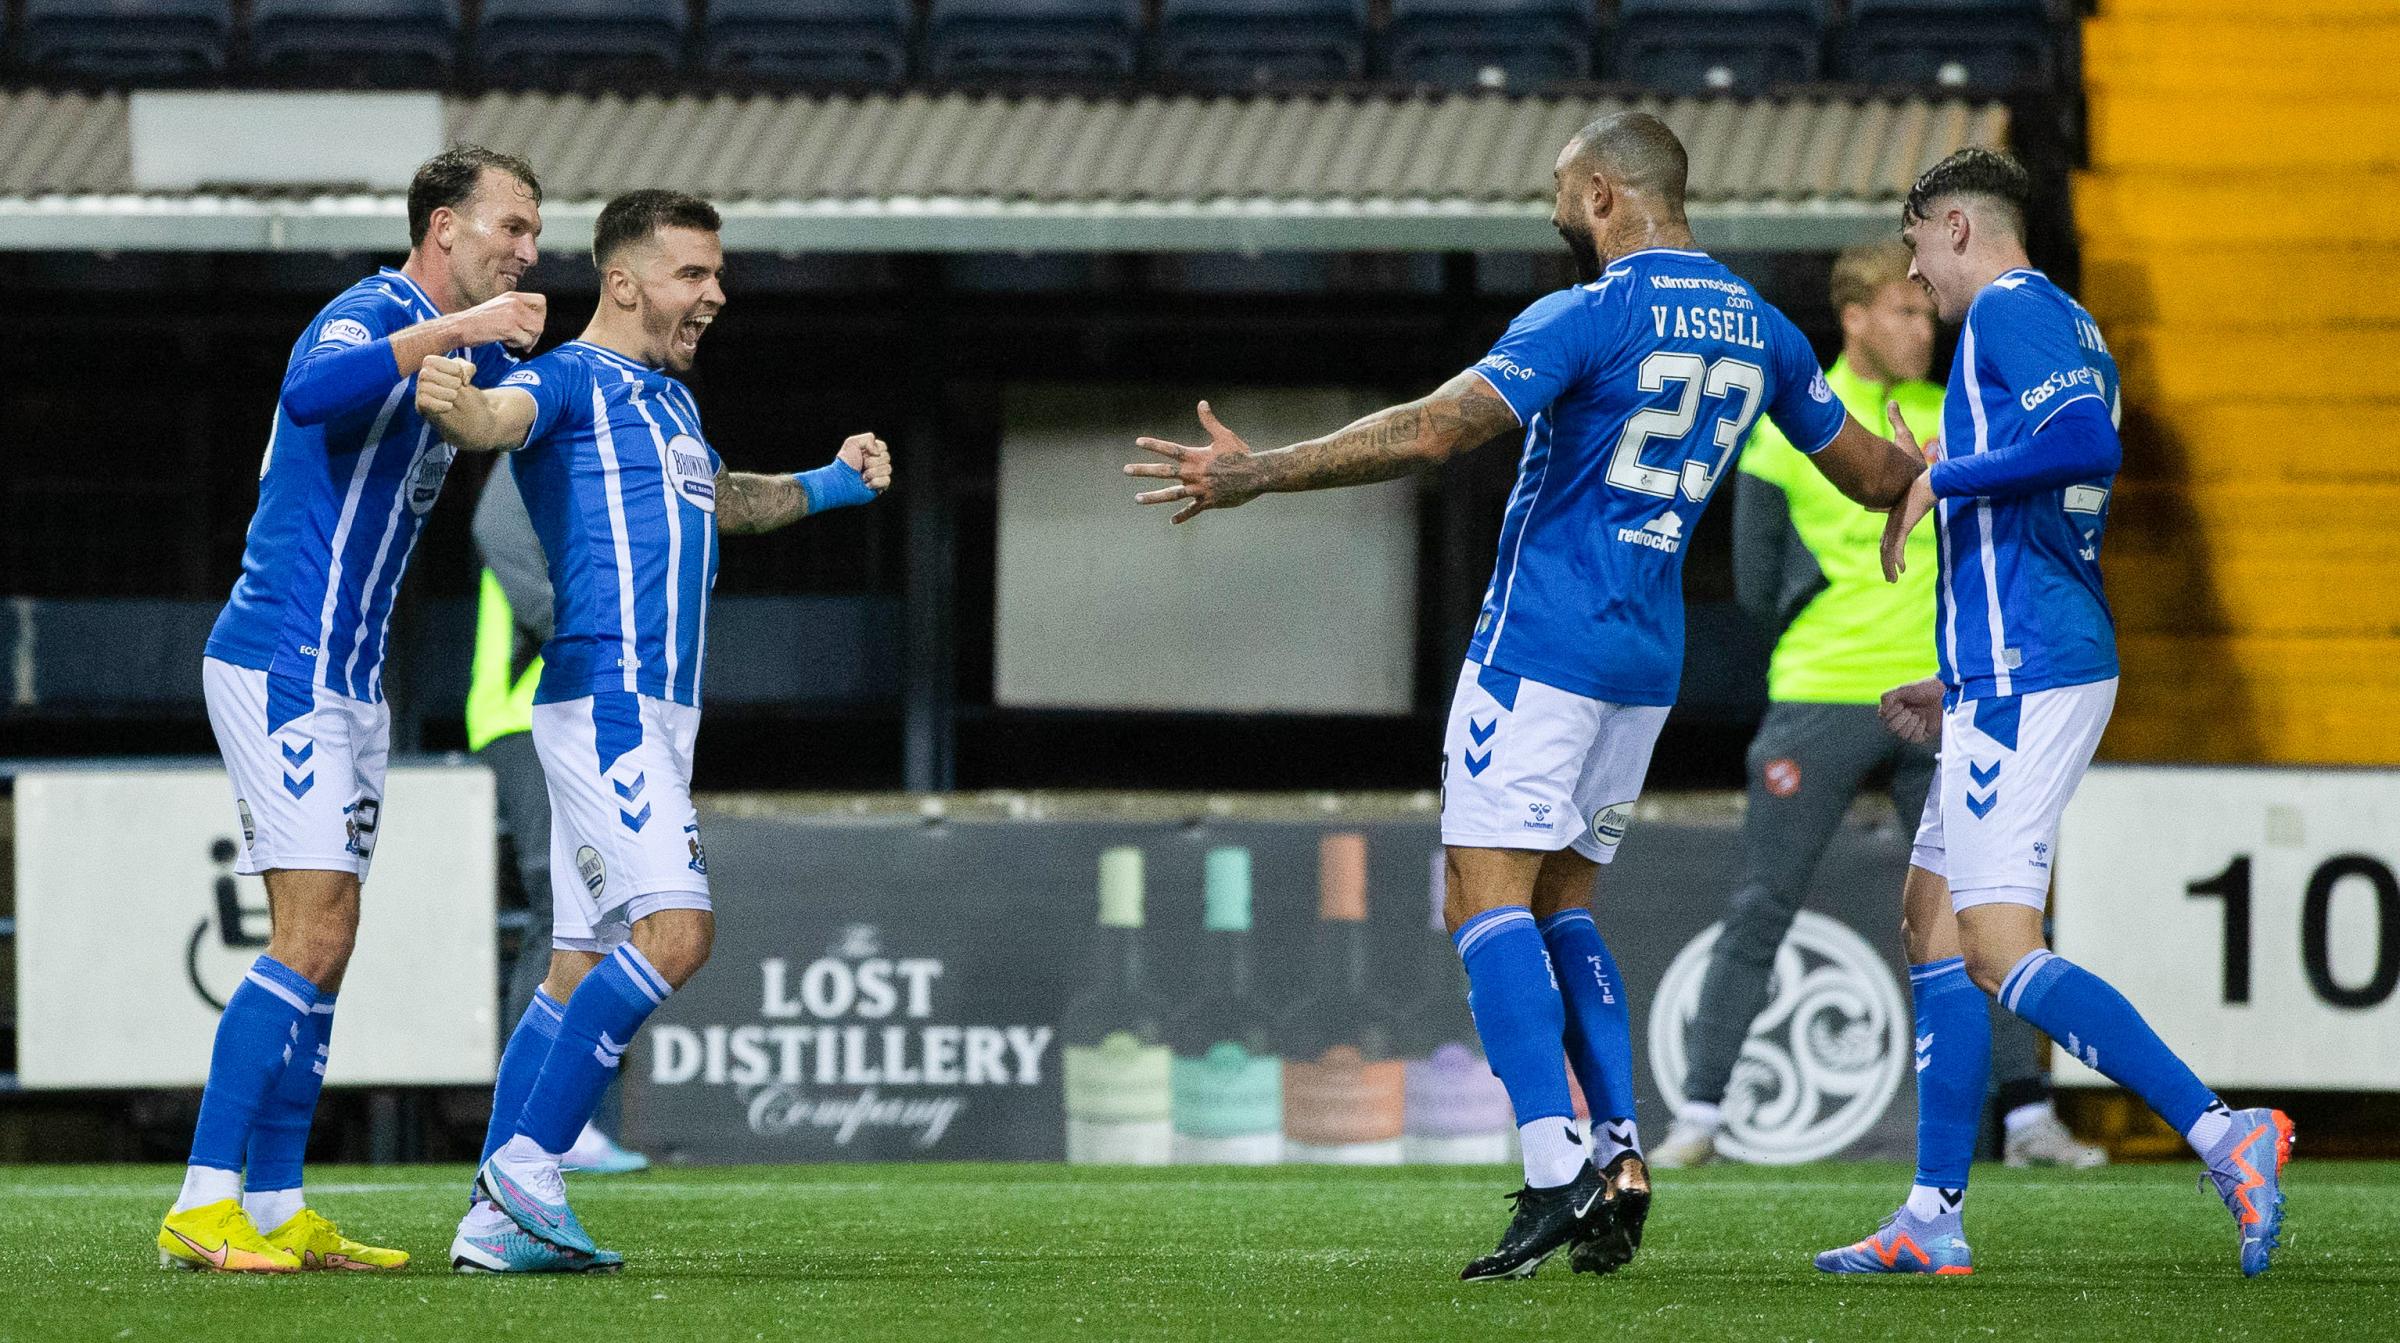 Kilmarnock 1 Dundee United 0: Instant reaction to the burning issues